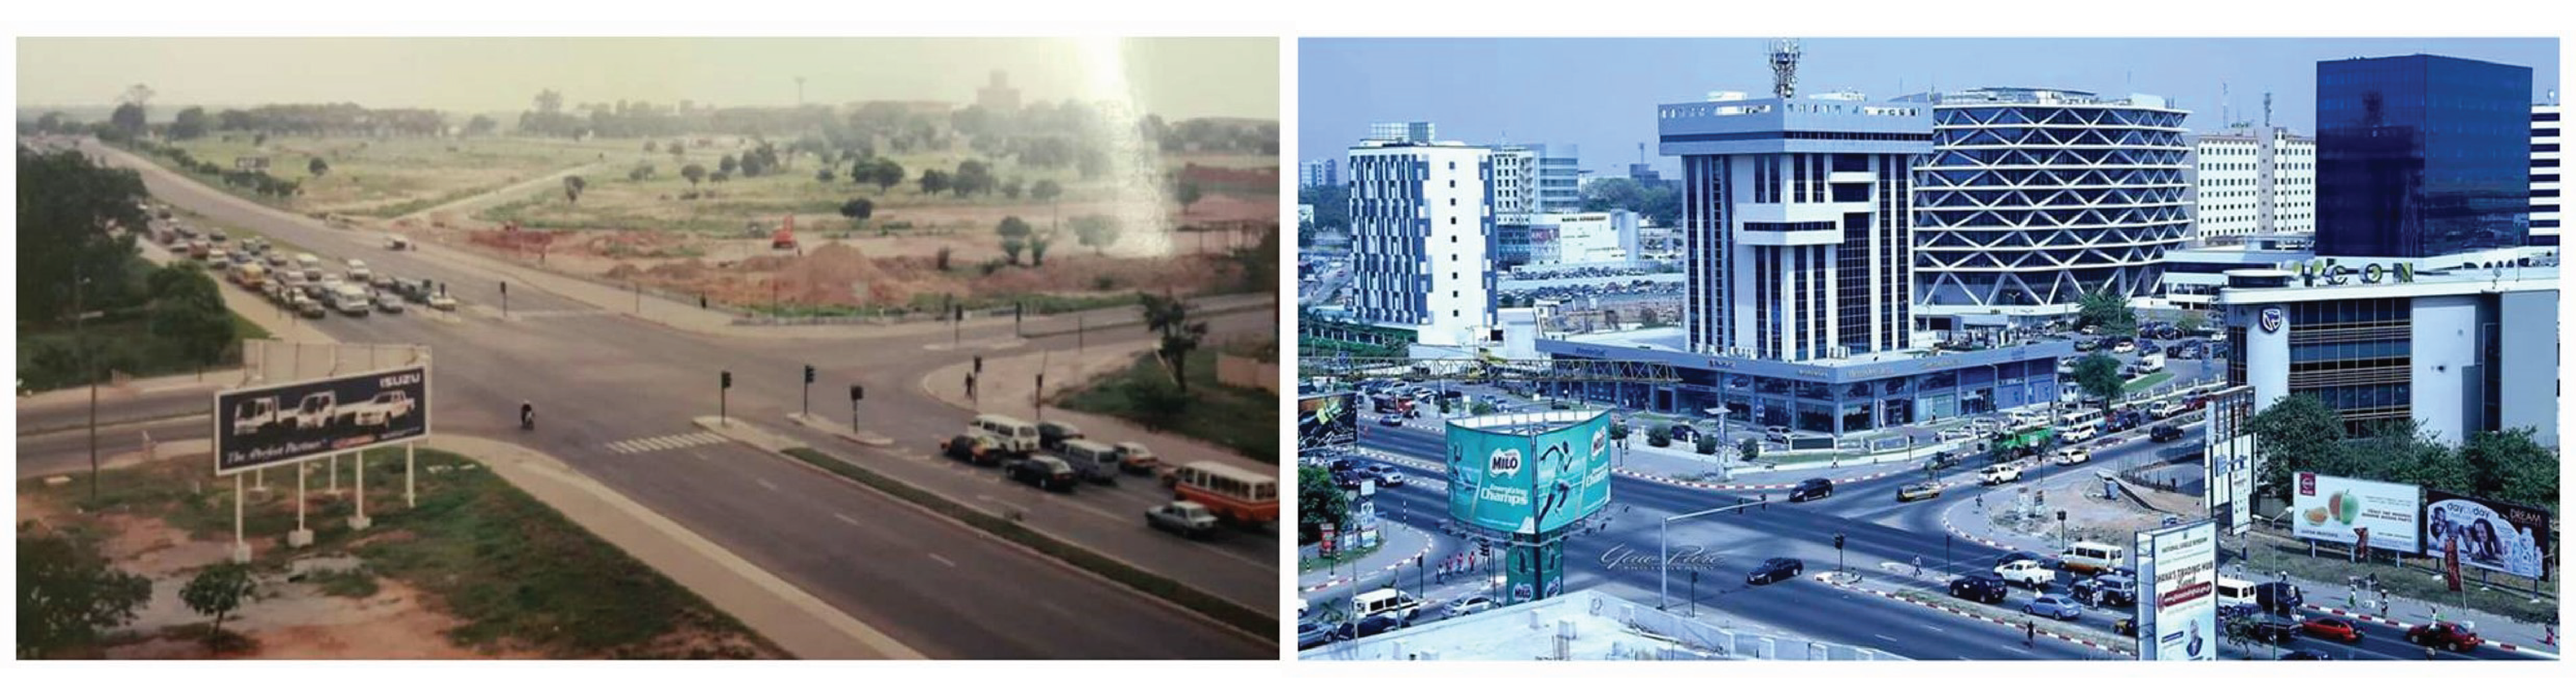 A comparison of an intersection in Accra, Ghana in 1999 versus 2009.